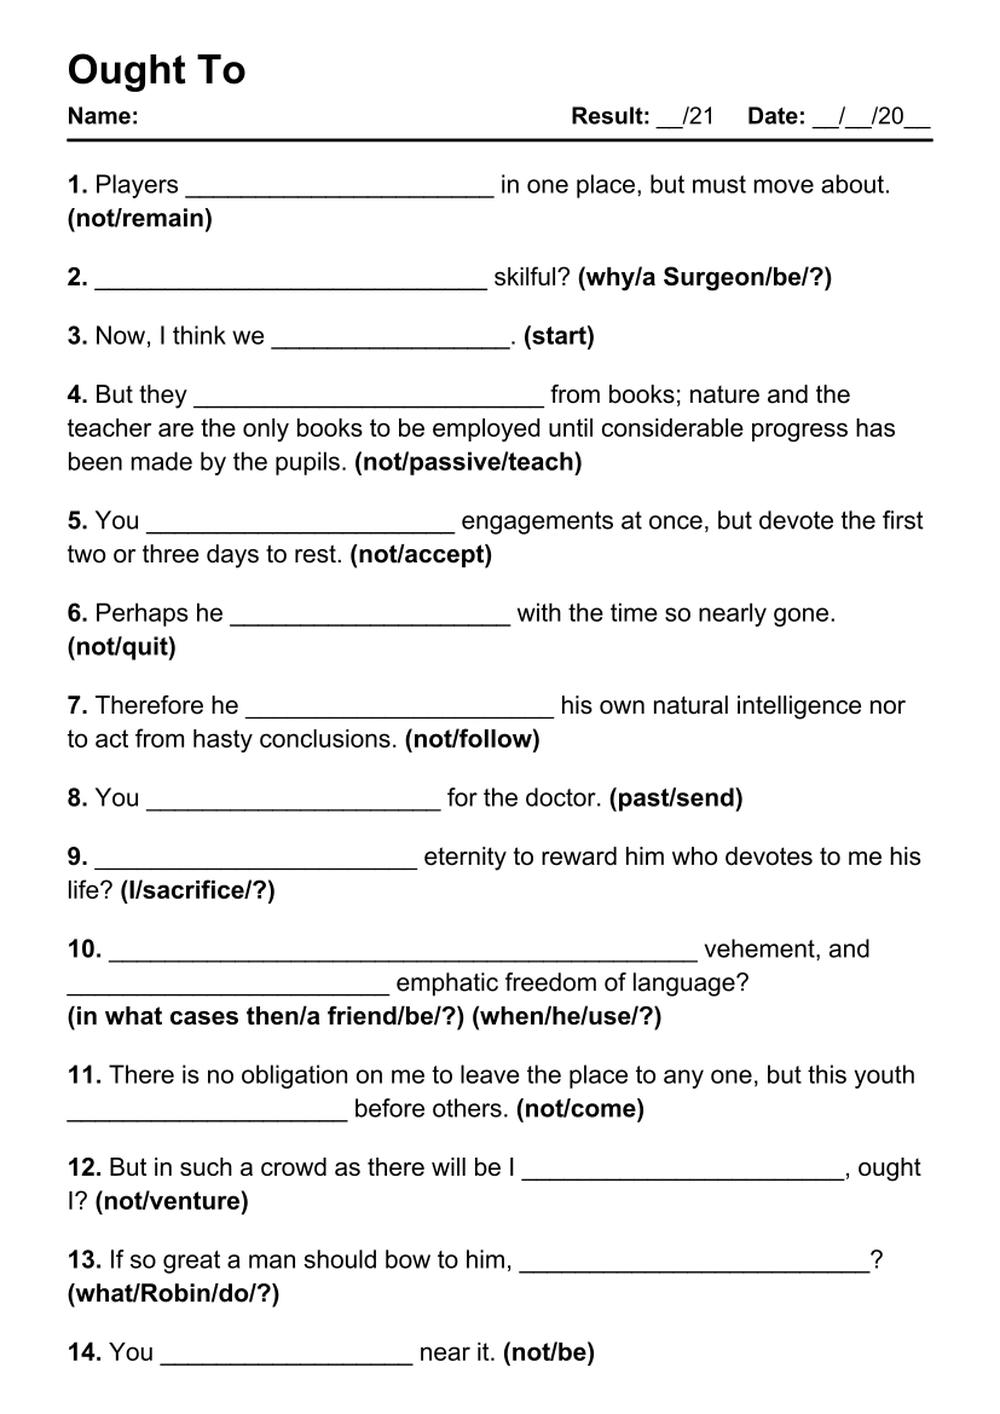 Printable Ought To Exercises - PDF Worksheet with Answers - Test 27